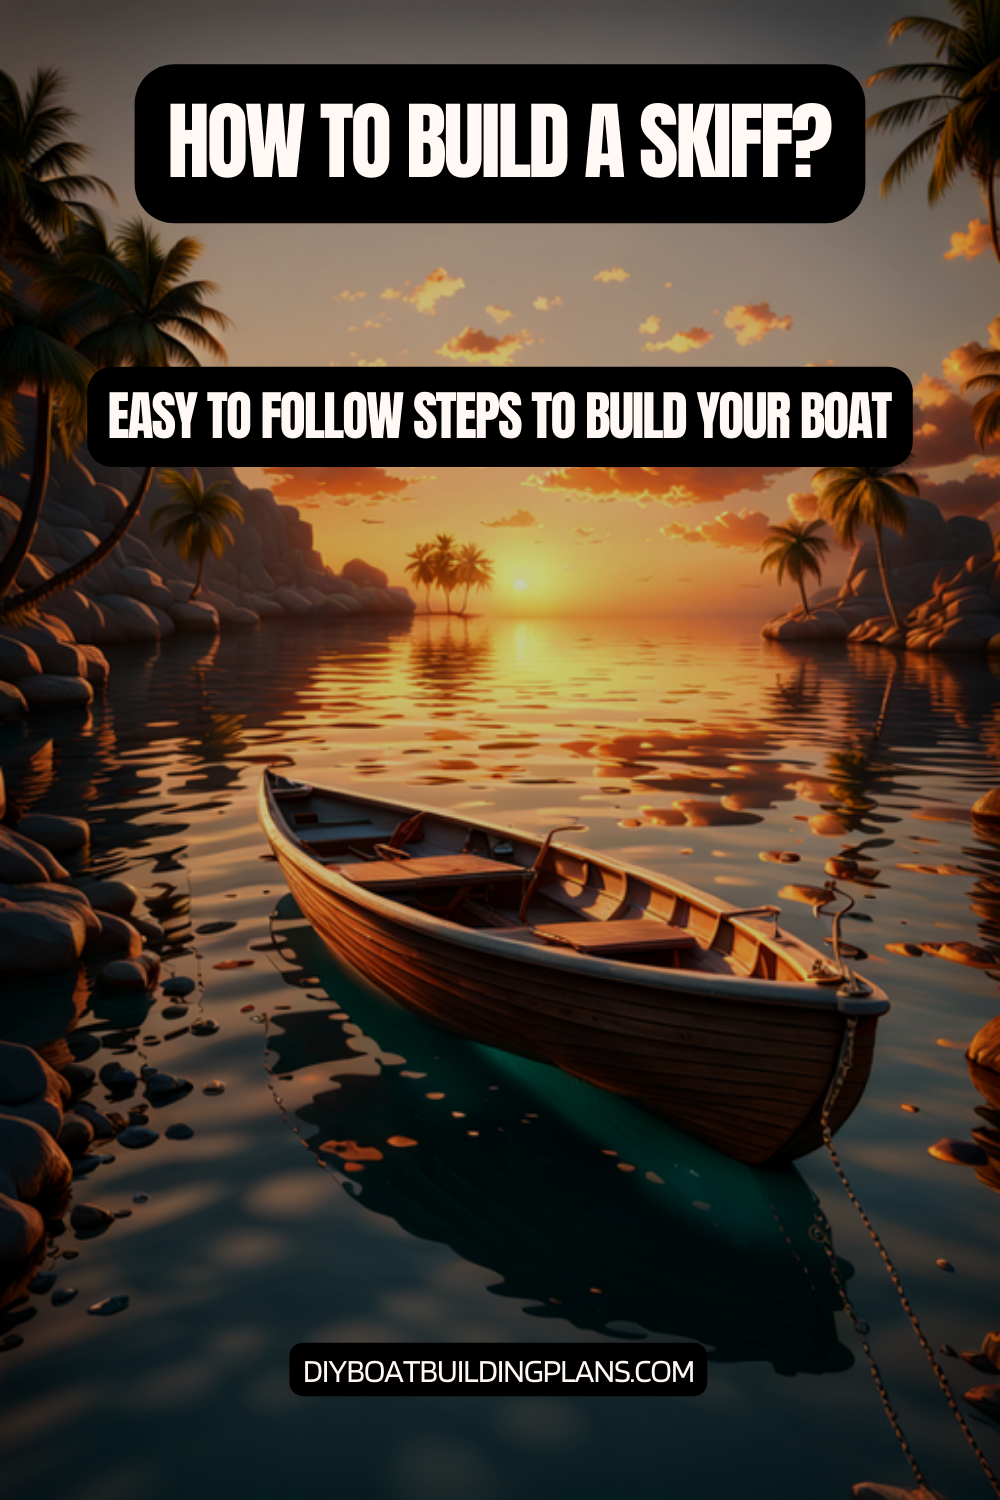 How To Build a Skiff